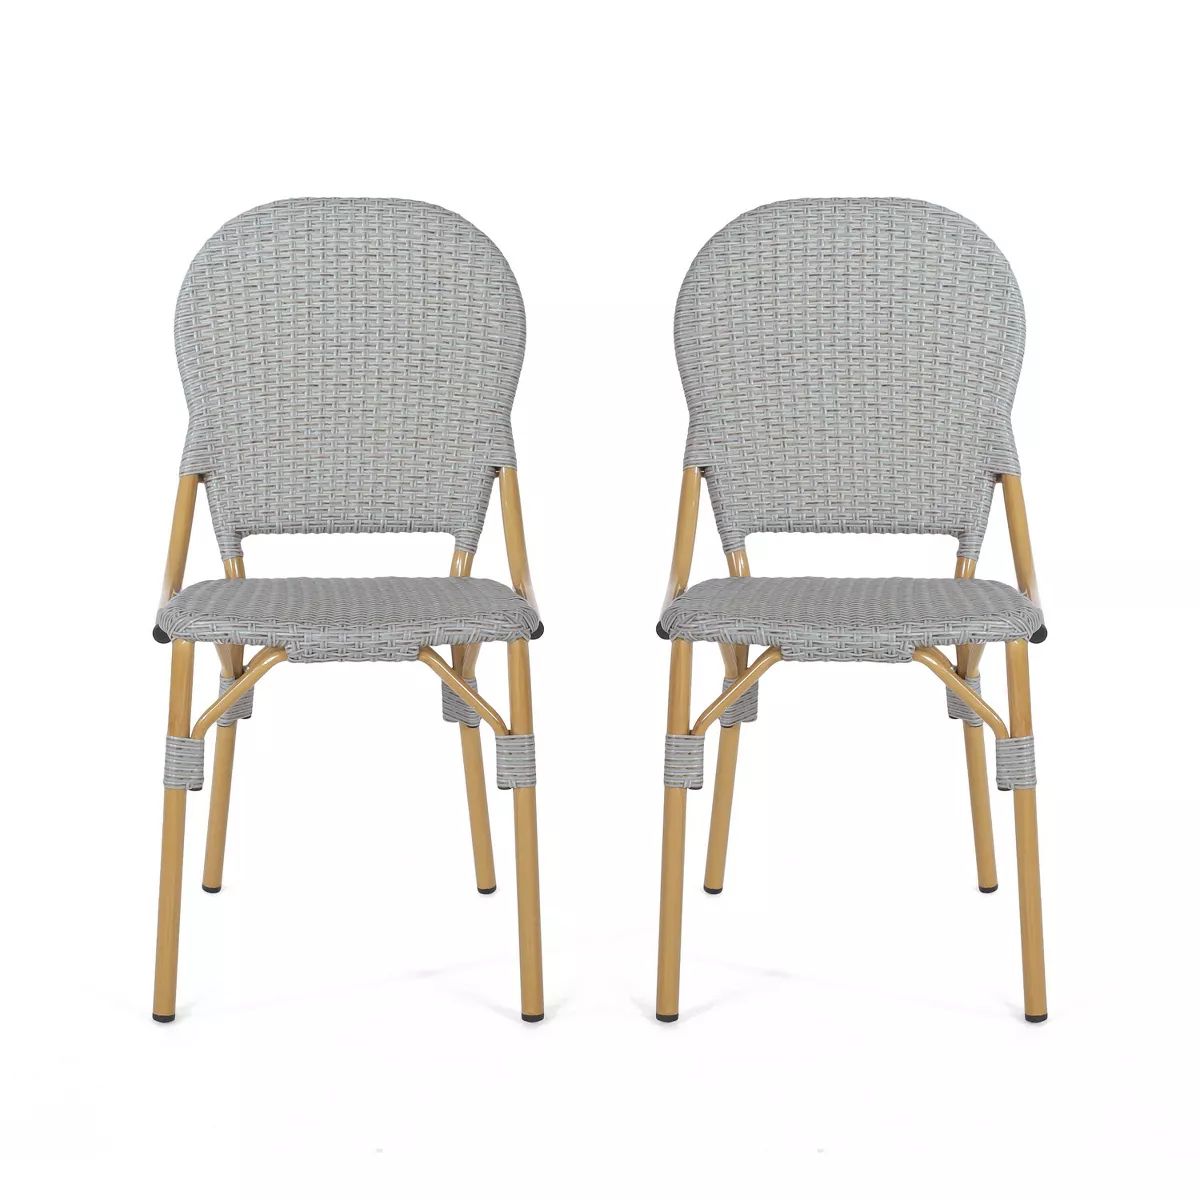 Arthur 2pk Outdoor Aluminum French Bistro Chairs - Gray/Bamboo - Christopher Knight Home | Target